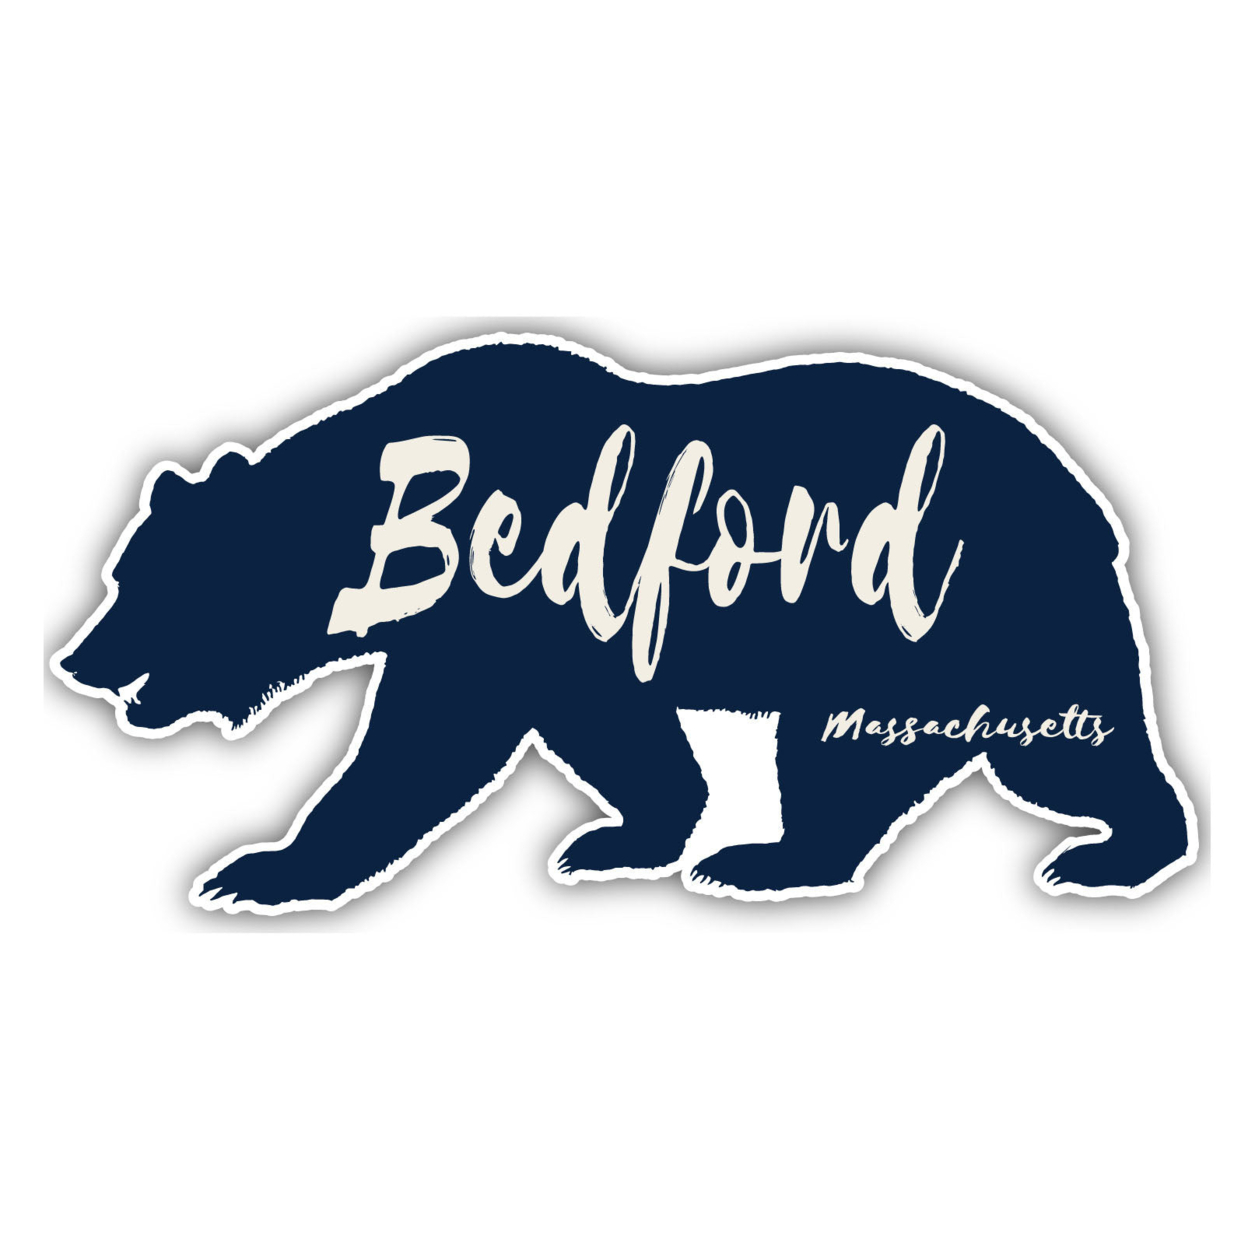 Bedford Massachusetts Souvenir Decorative Stickers (Choose Theme And Size) - 4-Pack, 12-Inch, Bear